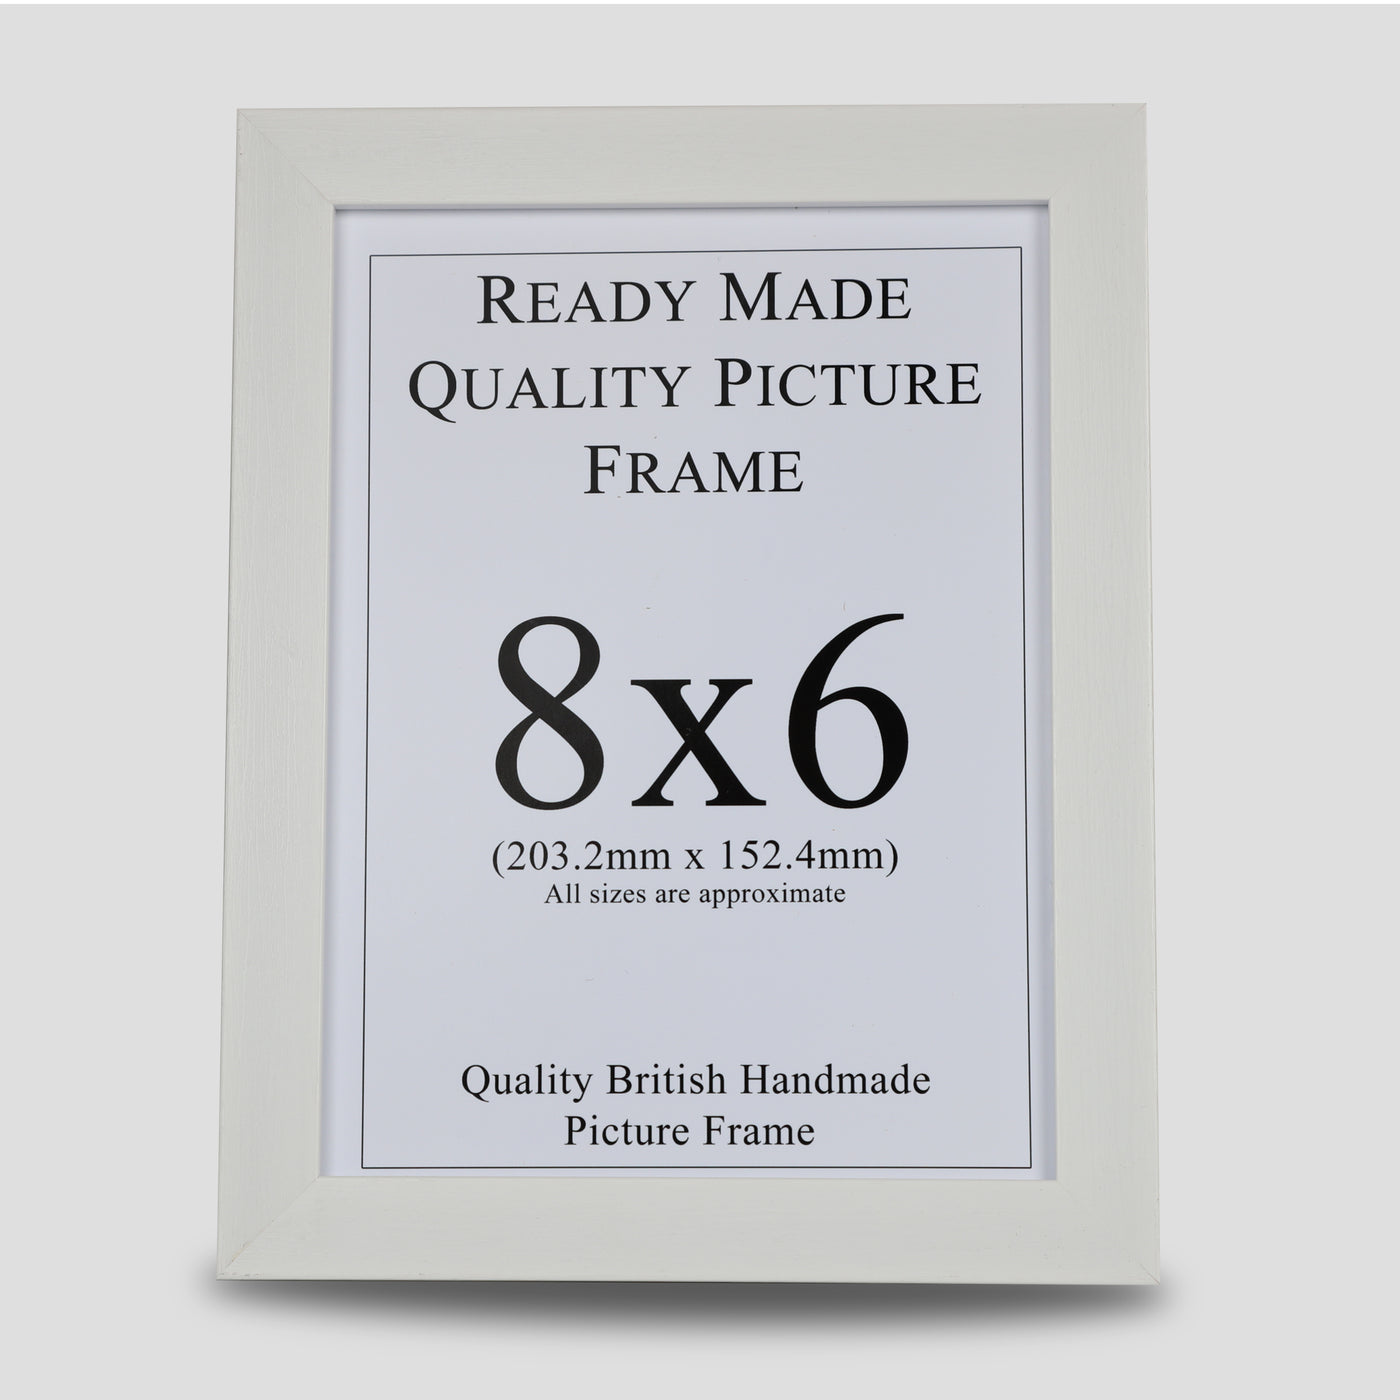 8x6 White Picture Frame